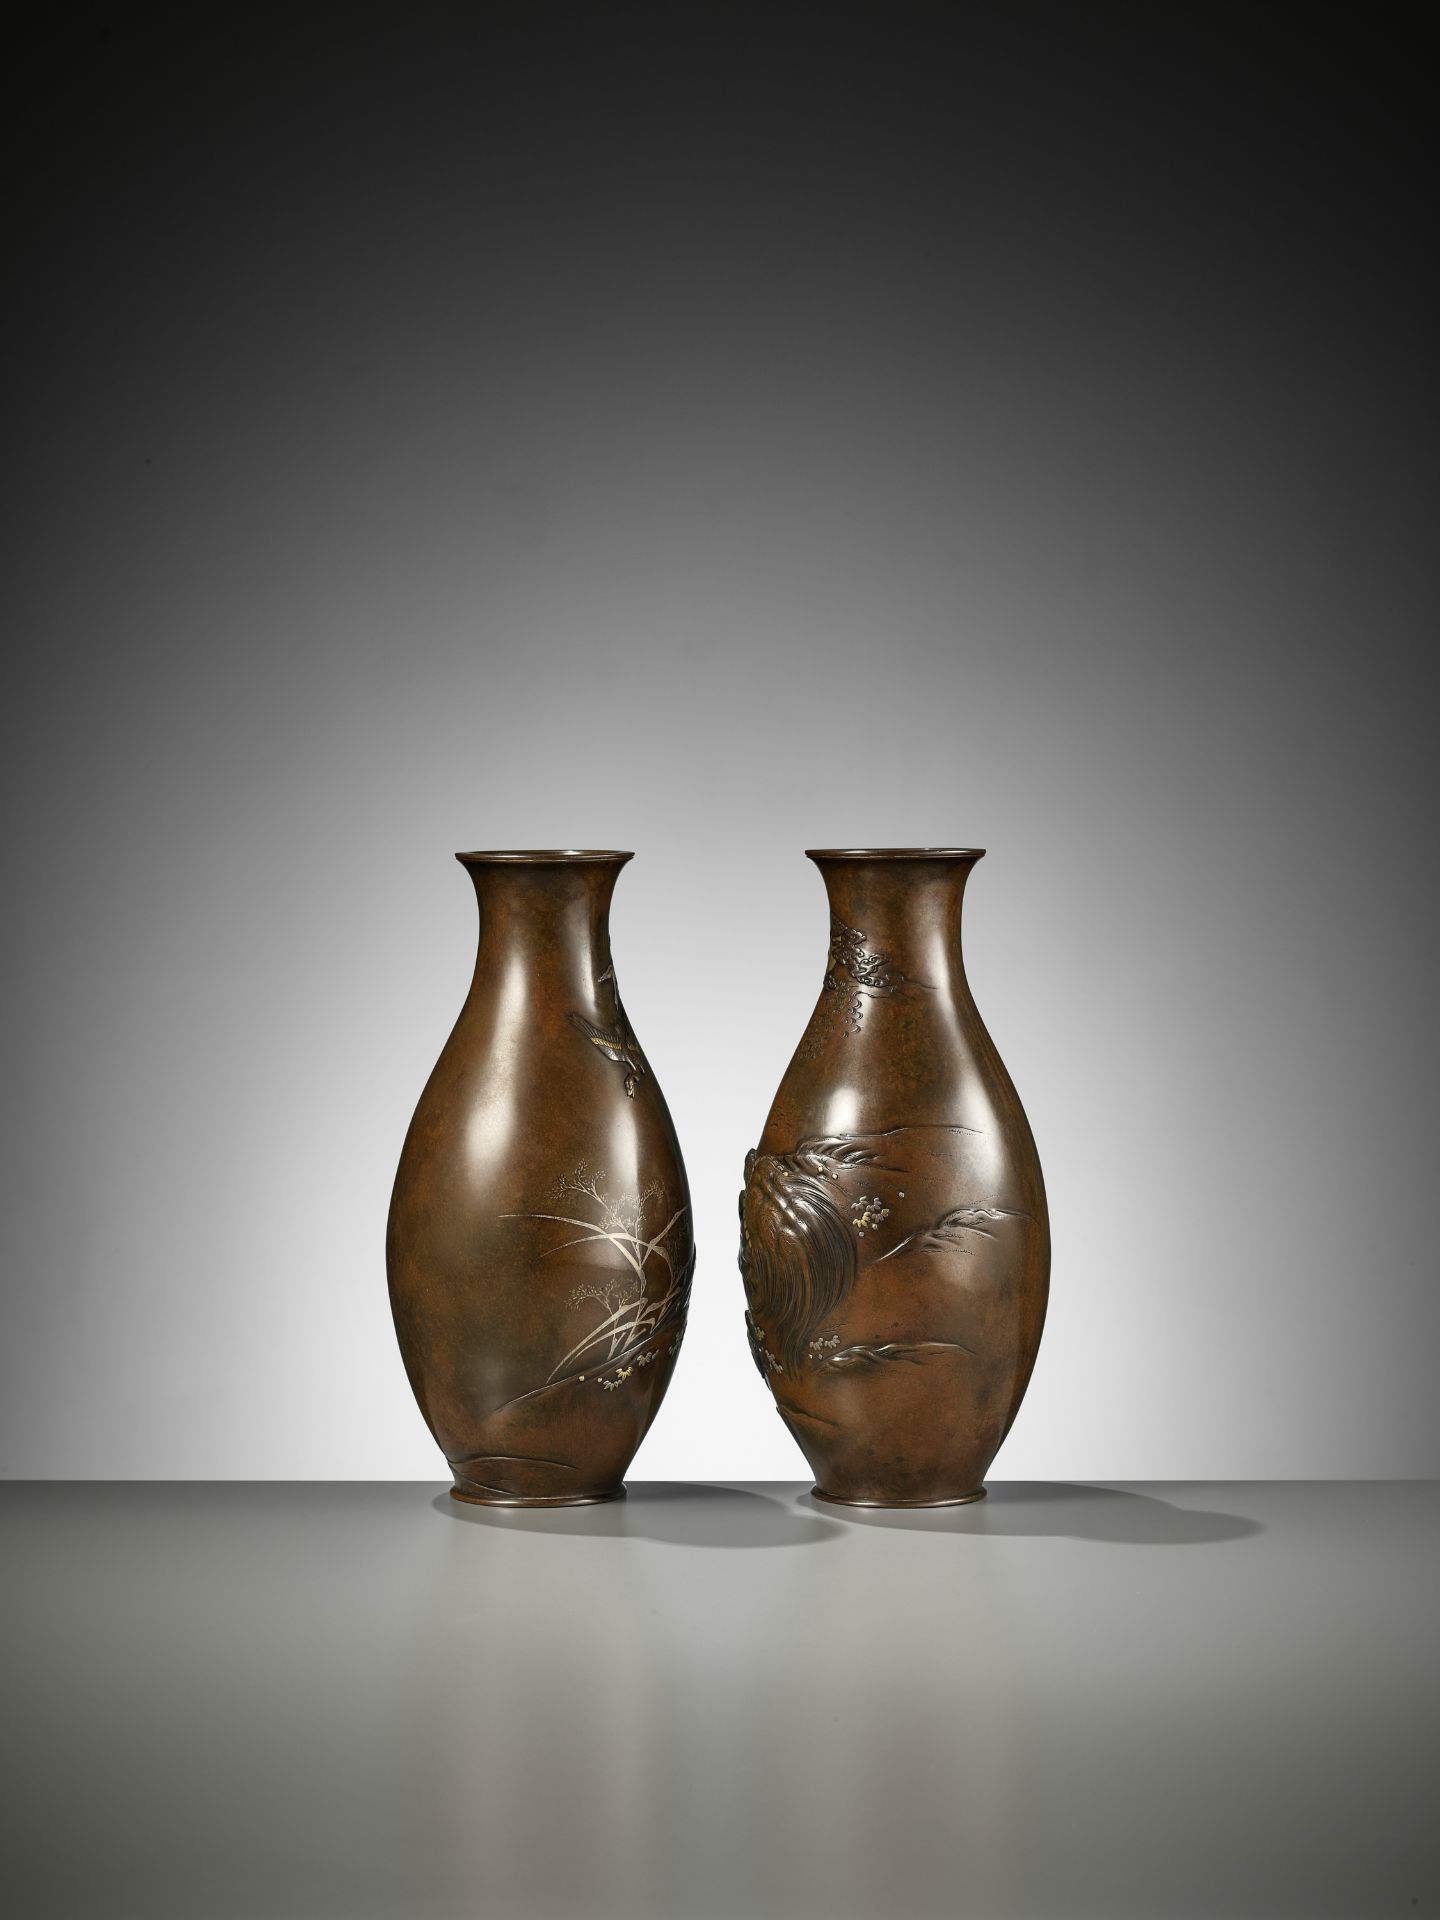 CHOMIN: A SUPERB PAIR OF INLAID BRONZE VASES WITH MINOGAME AND GEESE - Image 6 of 11